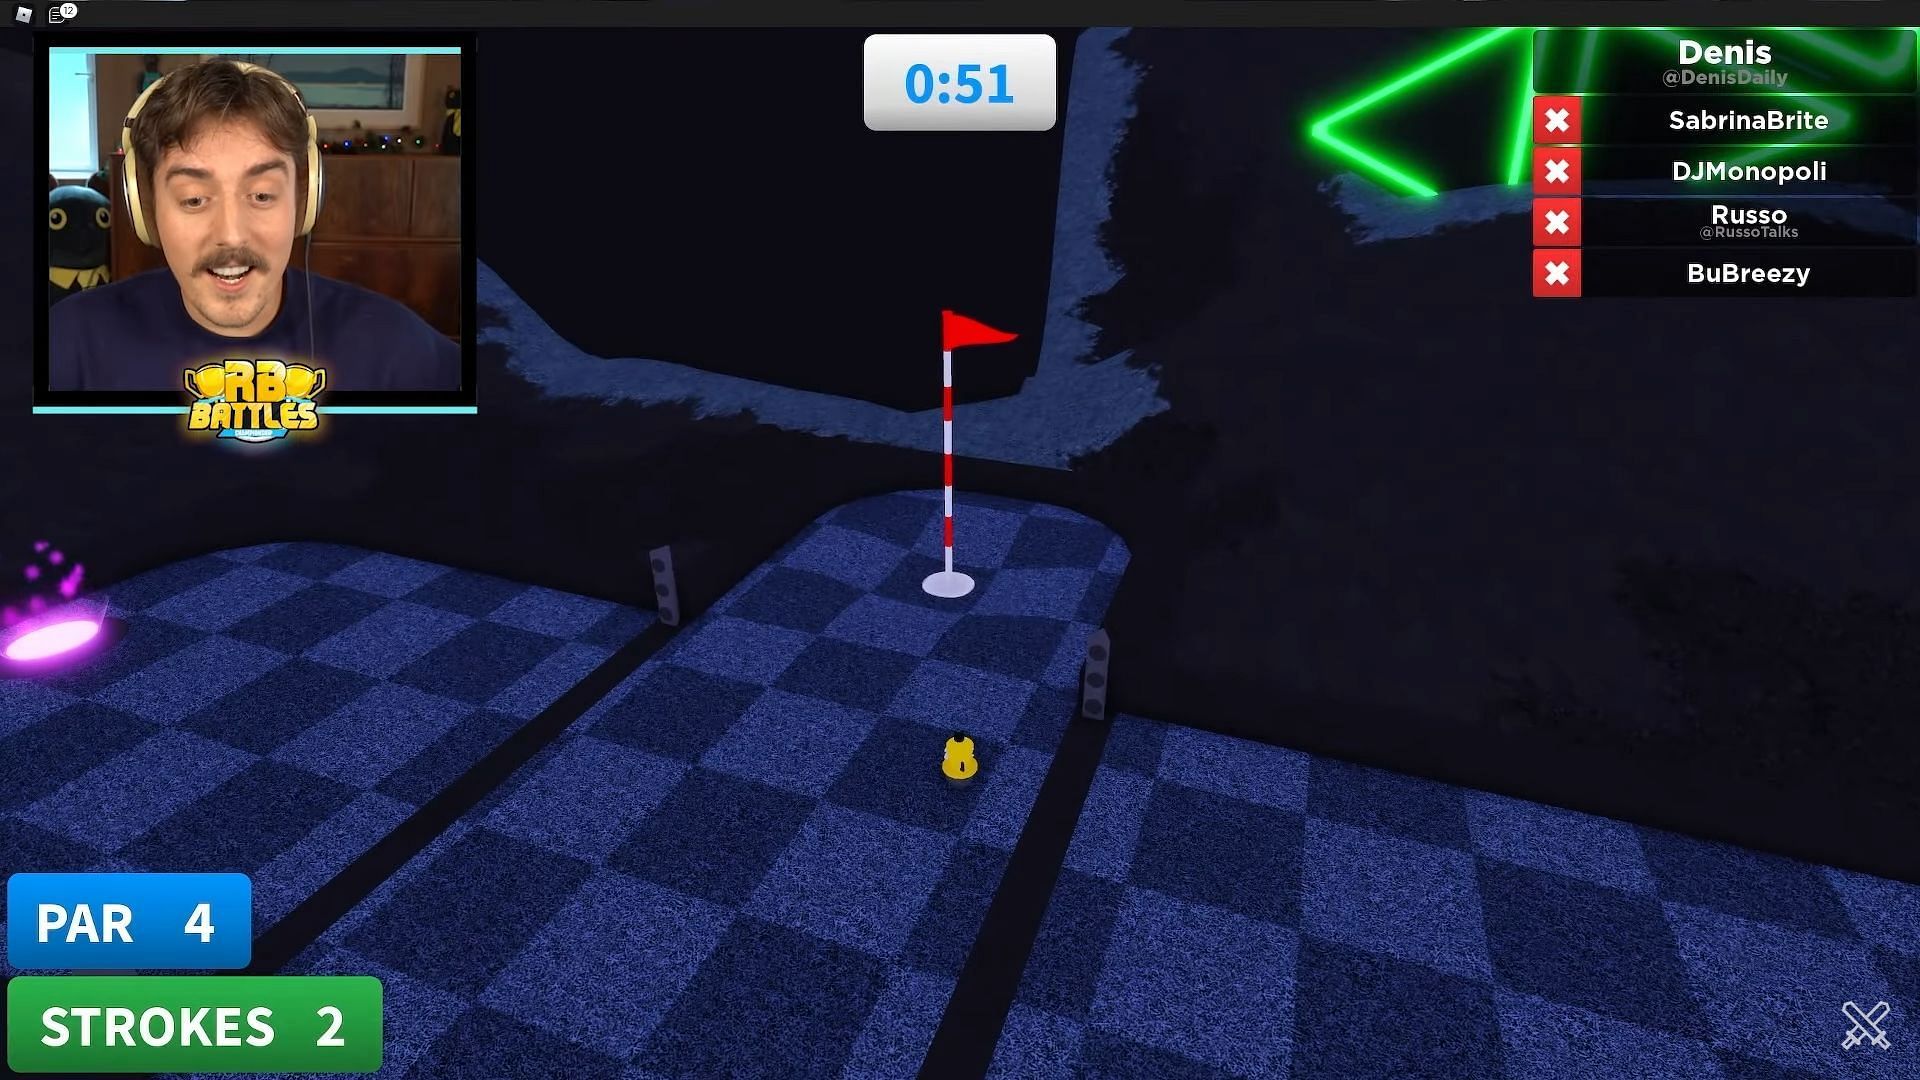 Denis made the third shot to end the round (Image via Roblox Battles YouTube)